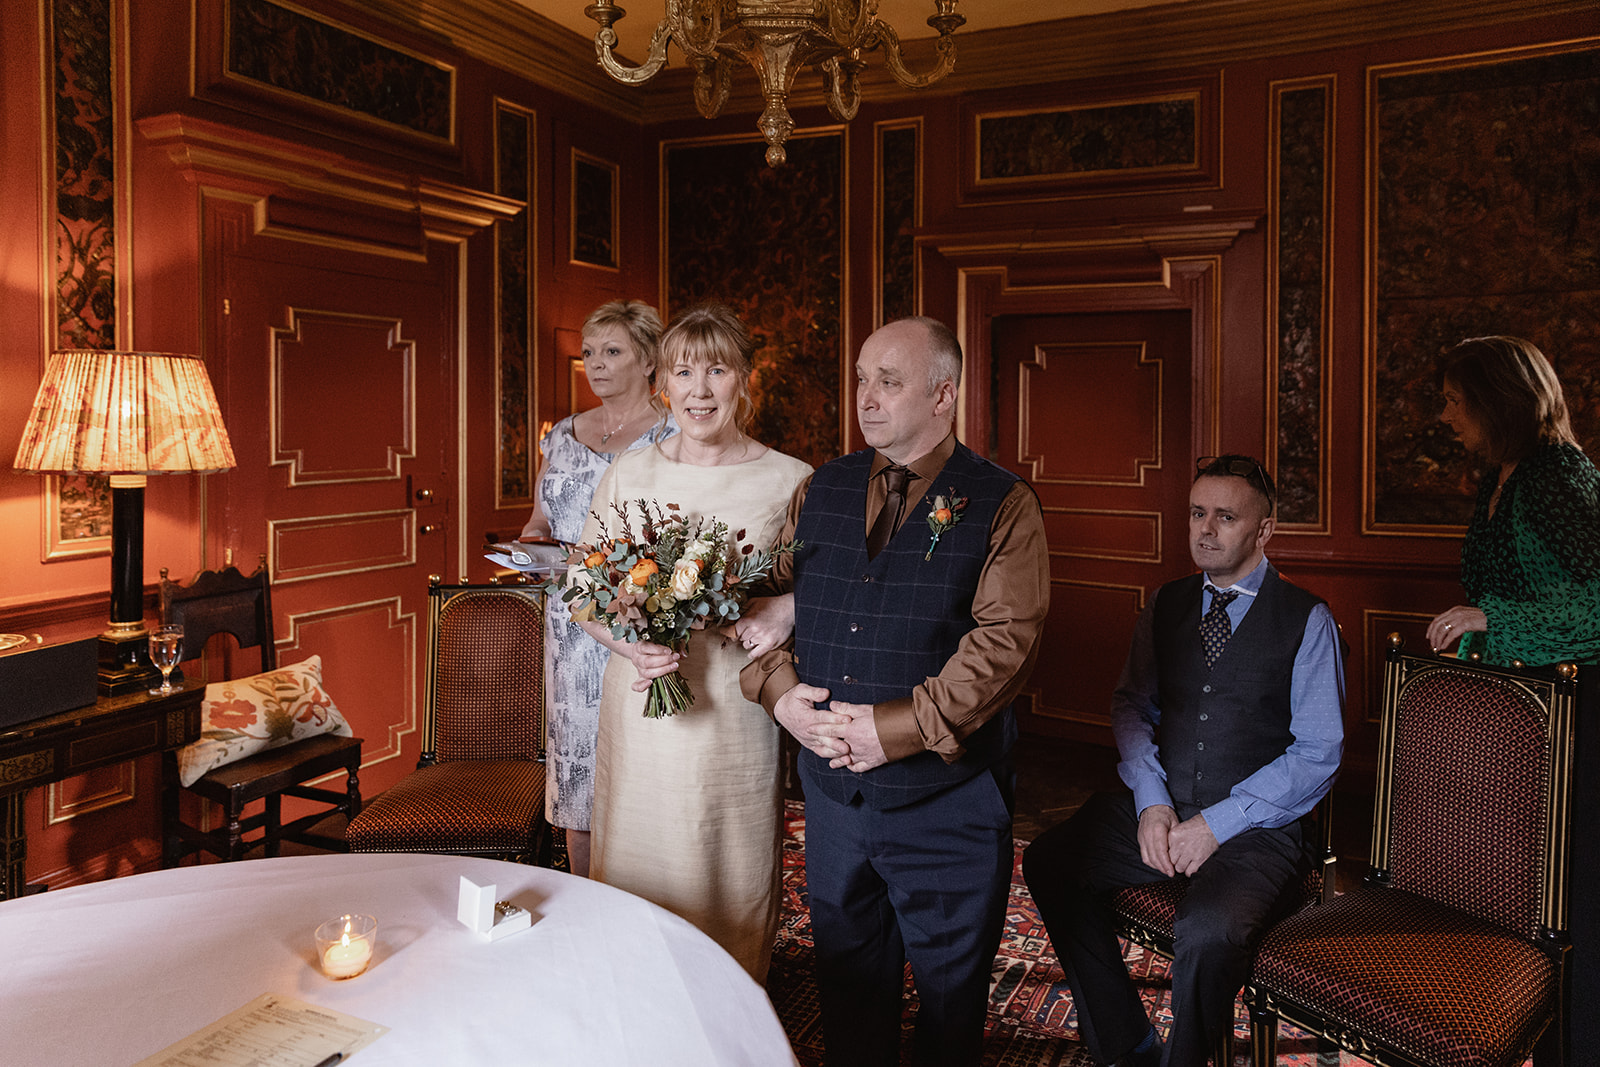 Intimate ceremony at the Leather room at Prestonfield house hotel